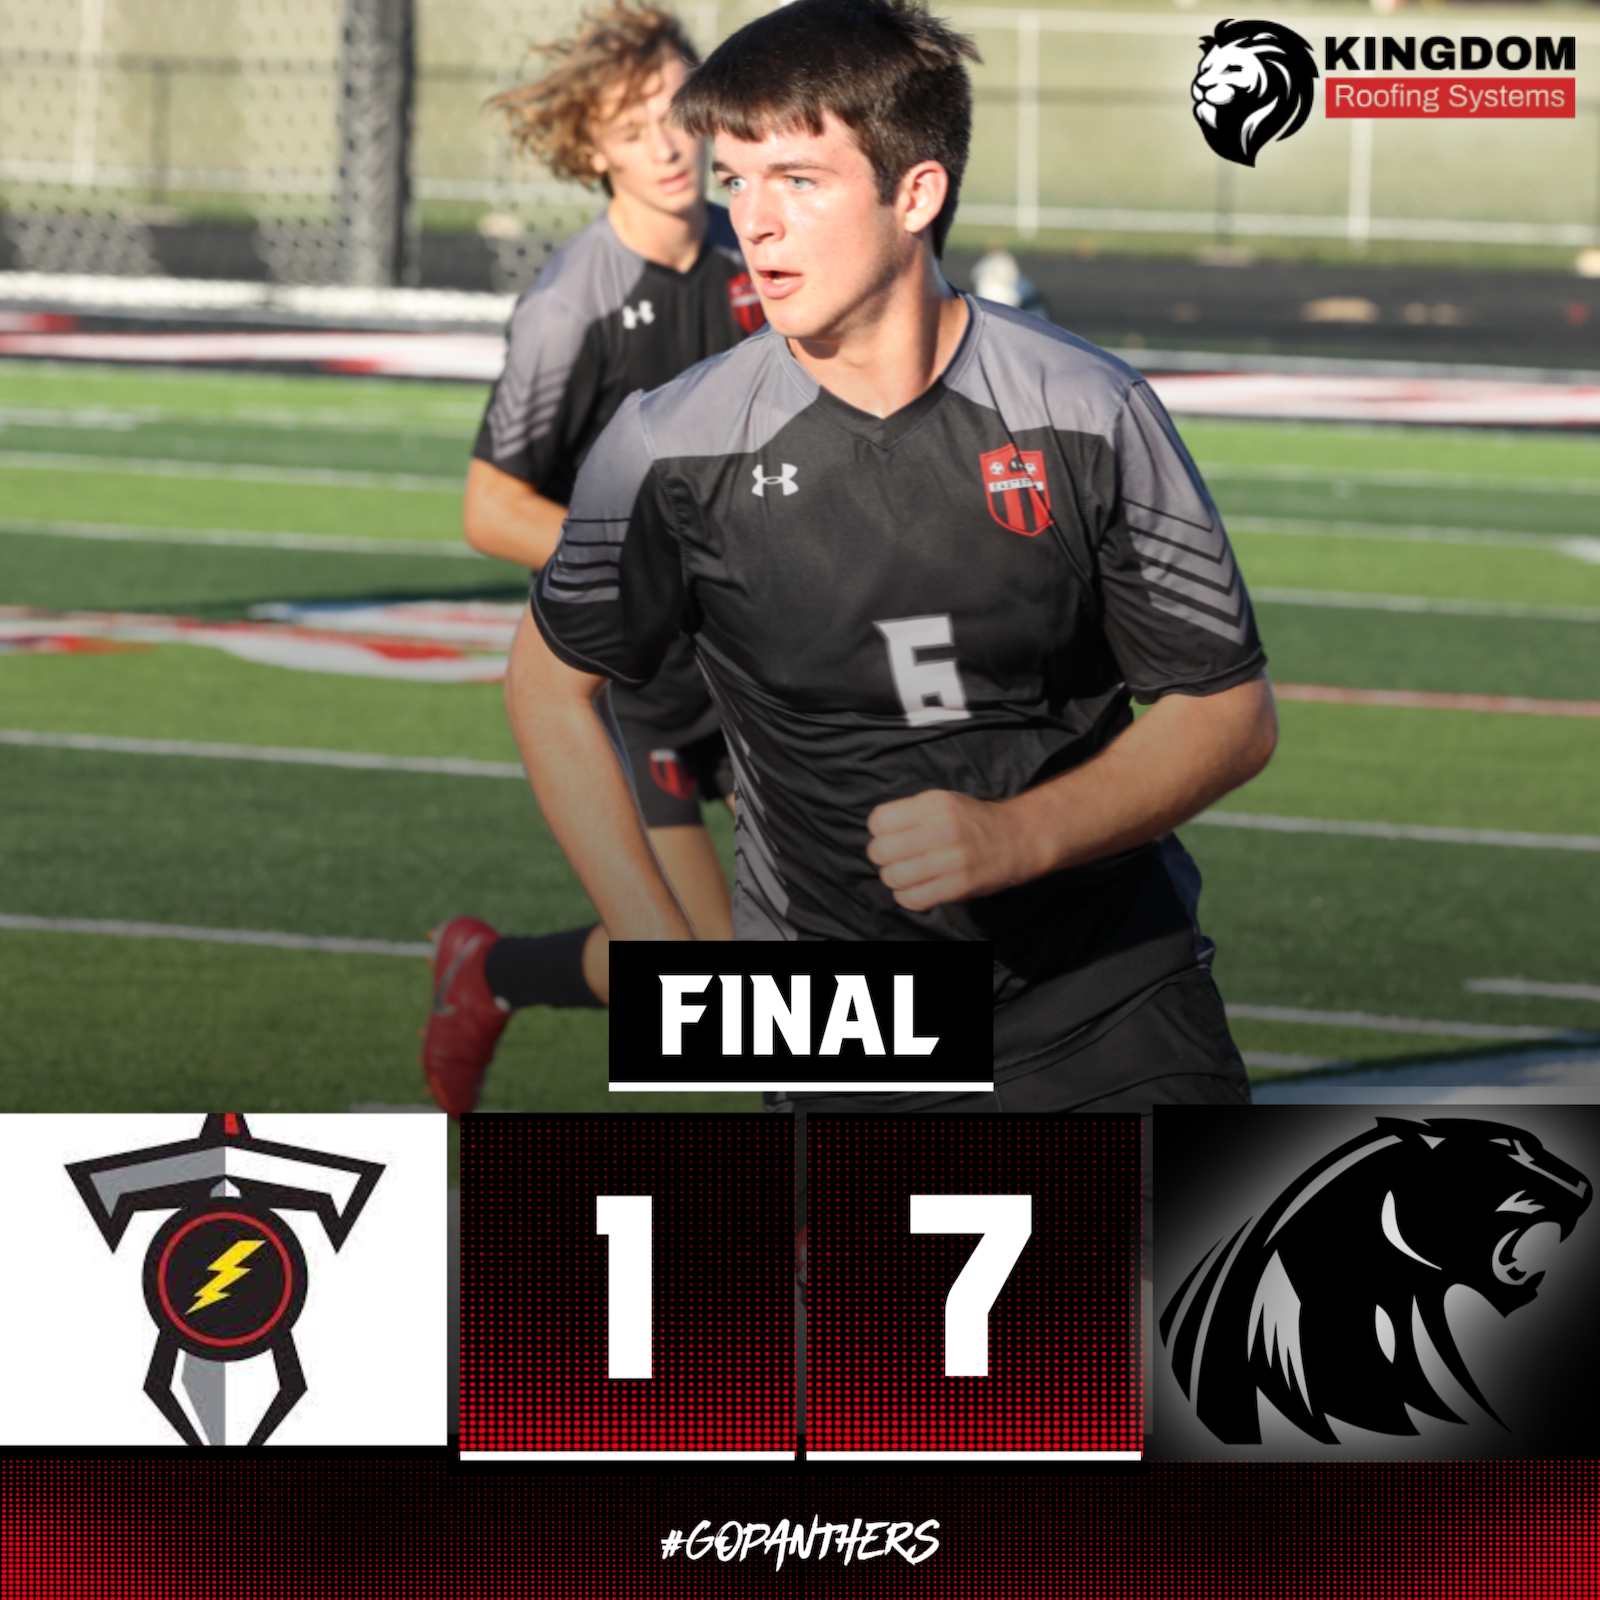 Boys soccer runs away with the win over Taylor cover photo